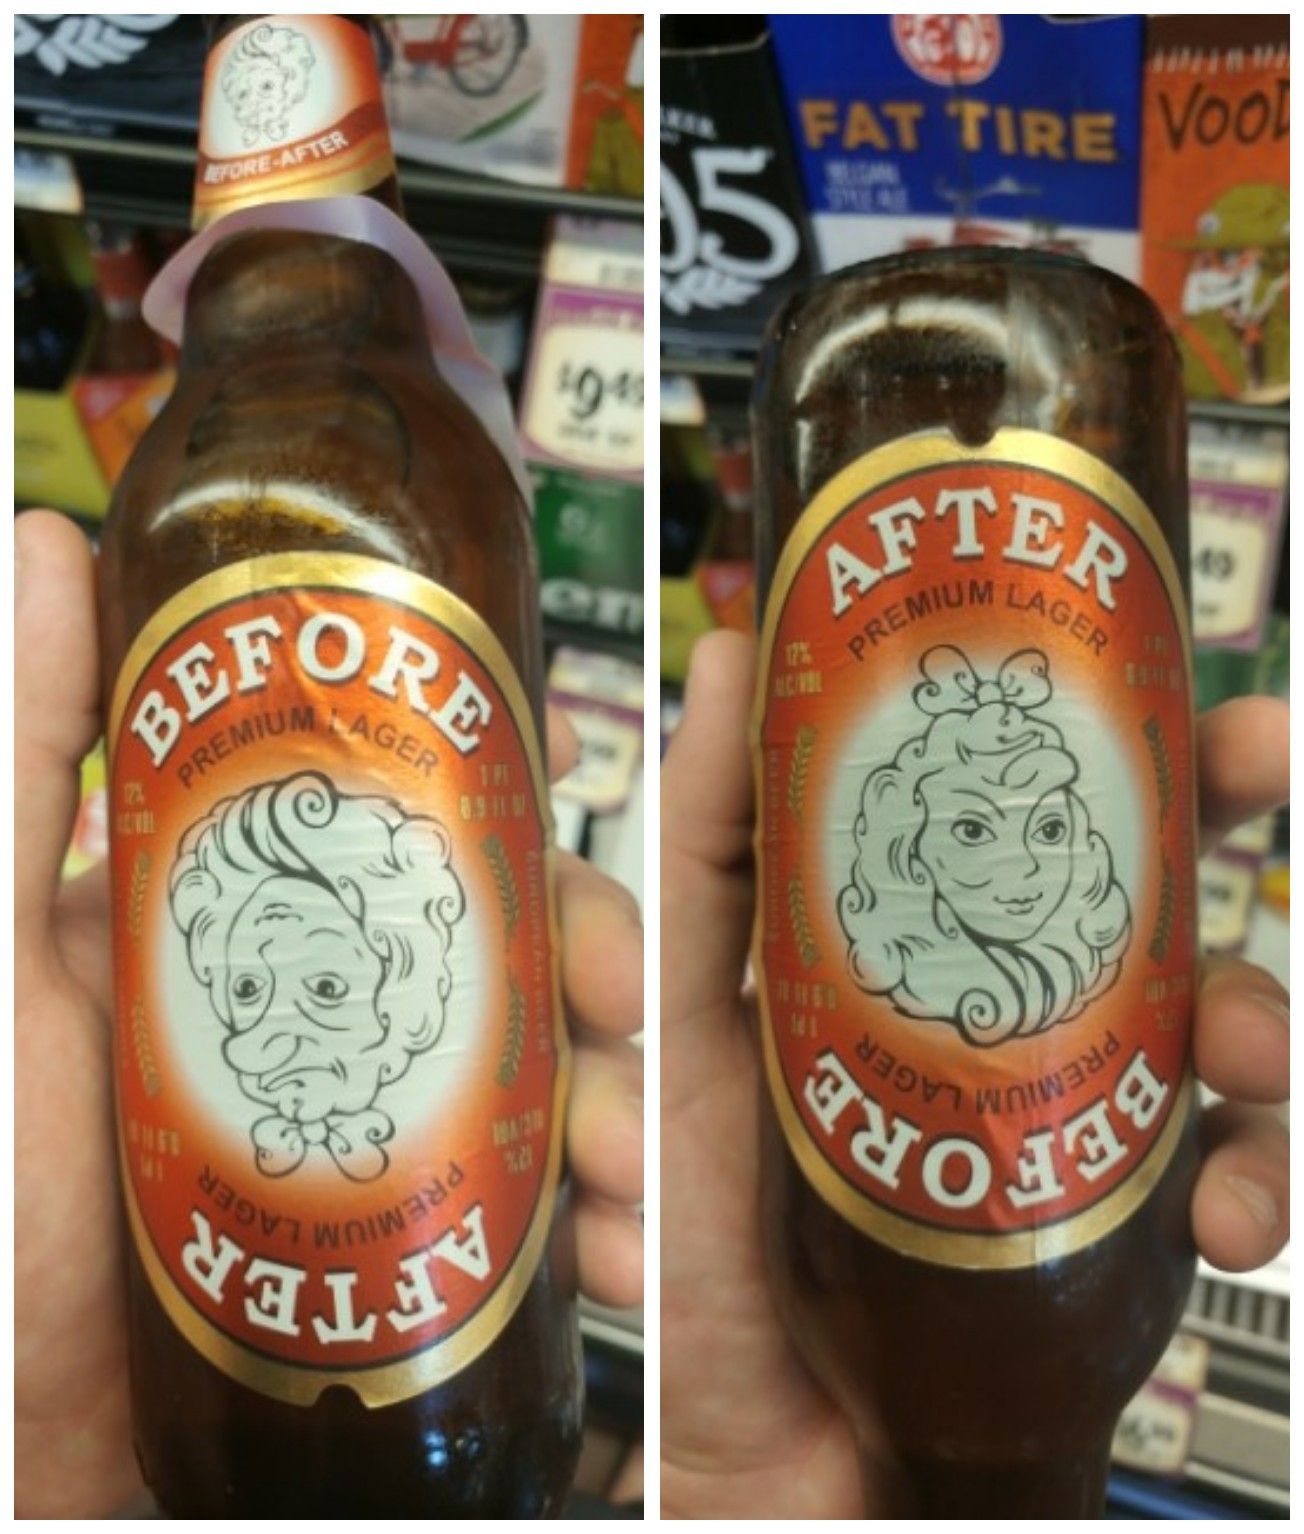 This beer has the best label I've ever seen.